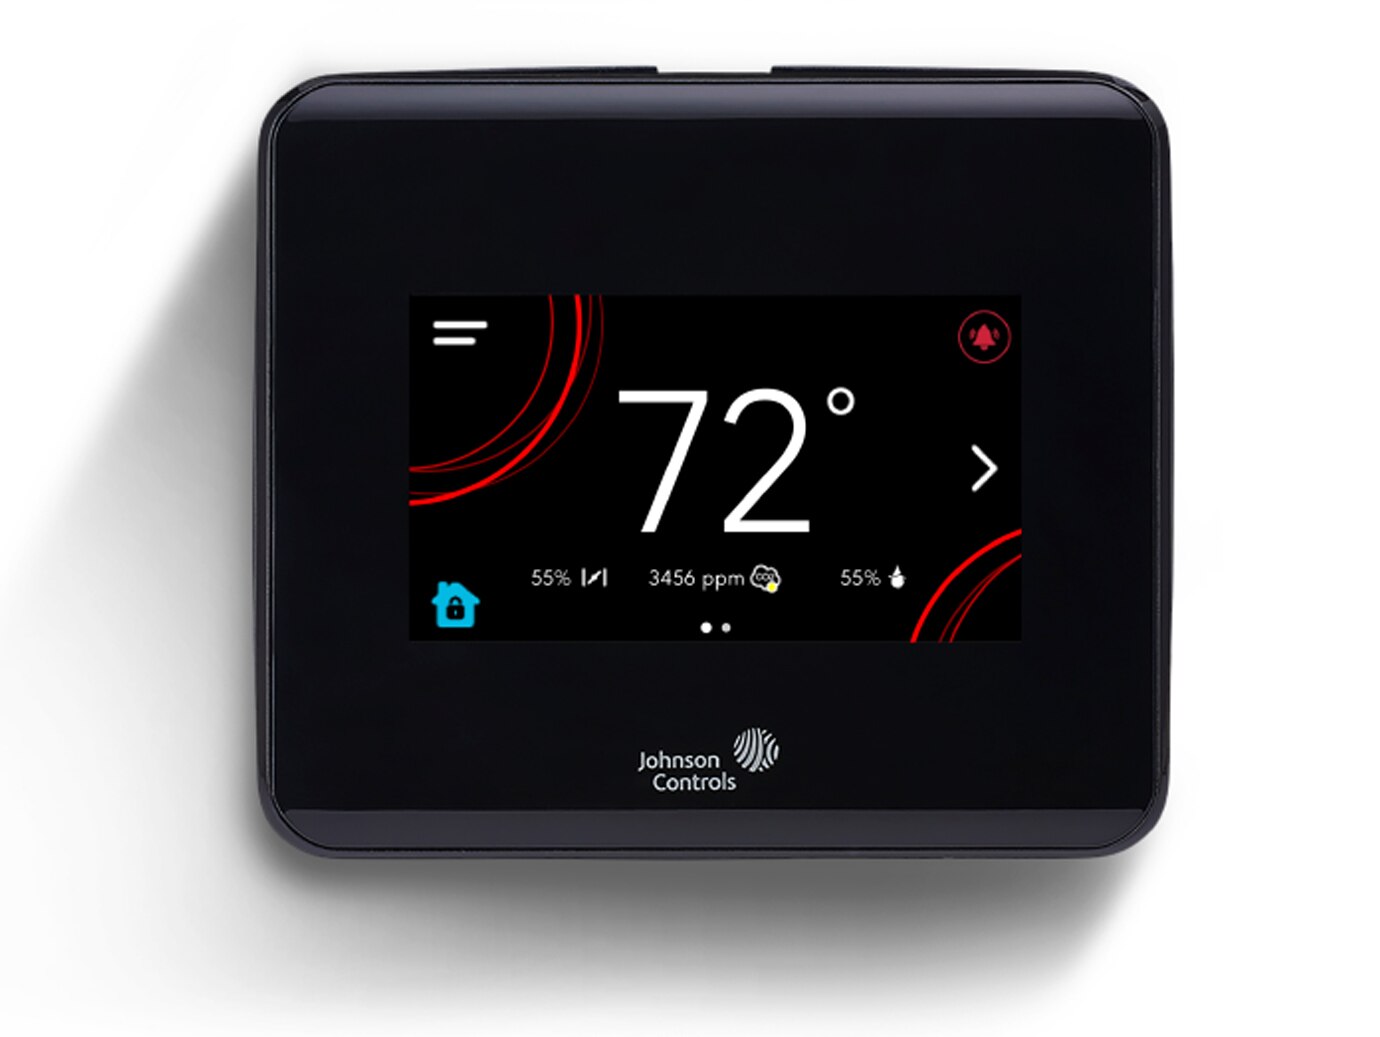 A black networked thermostat, displaying a temperature of 72 degrees Fahrenheit 